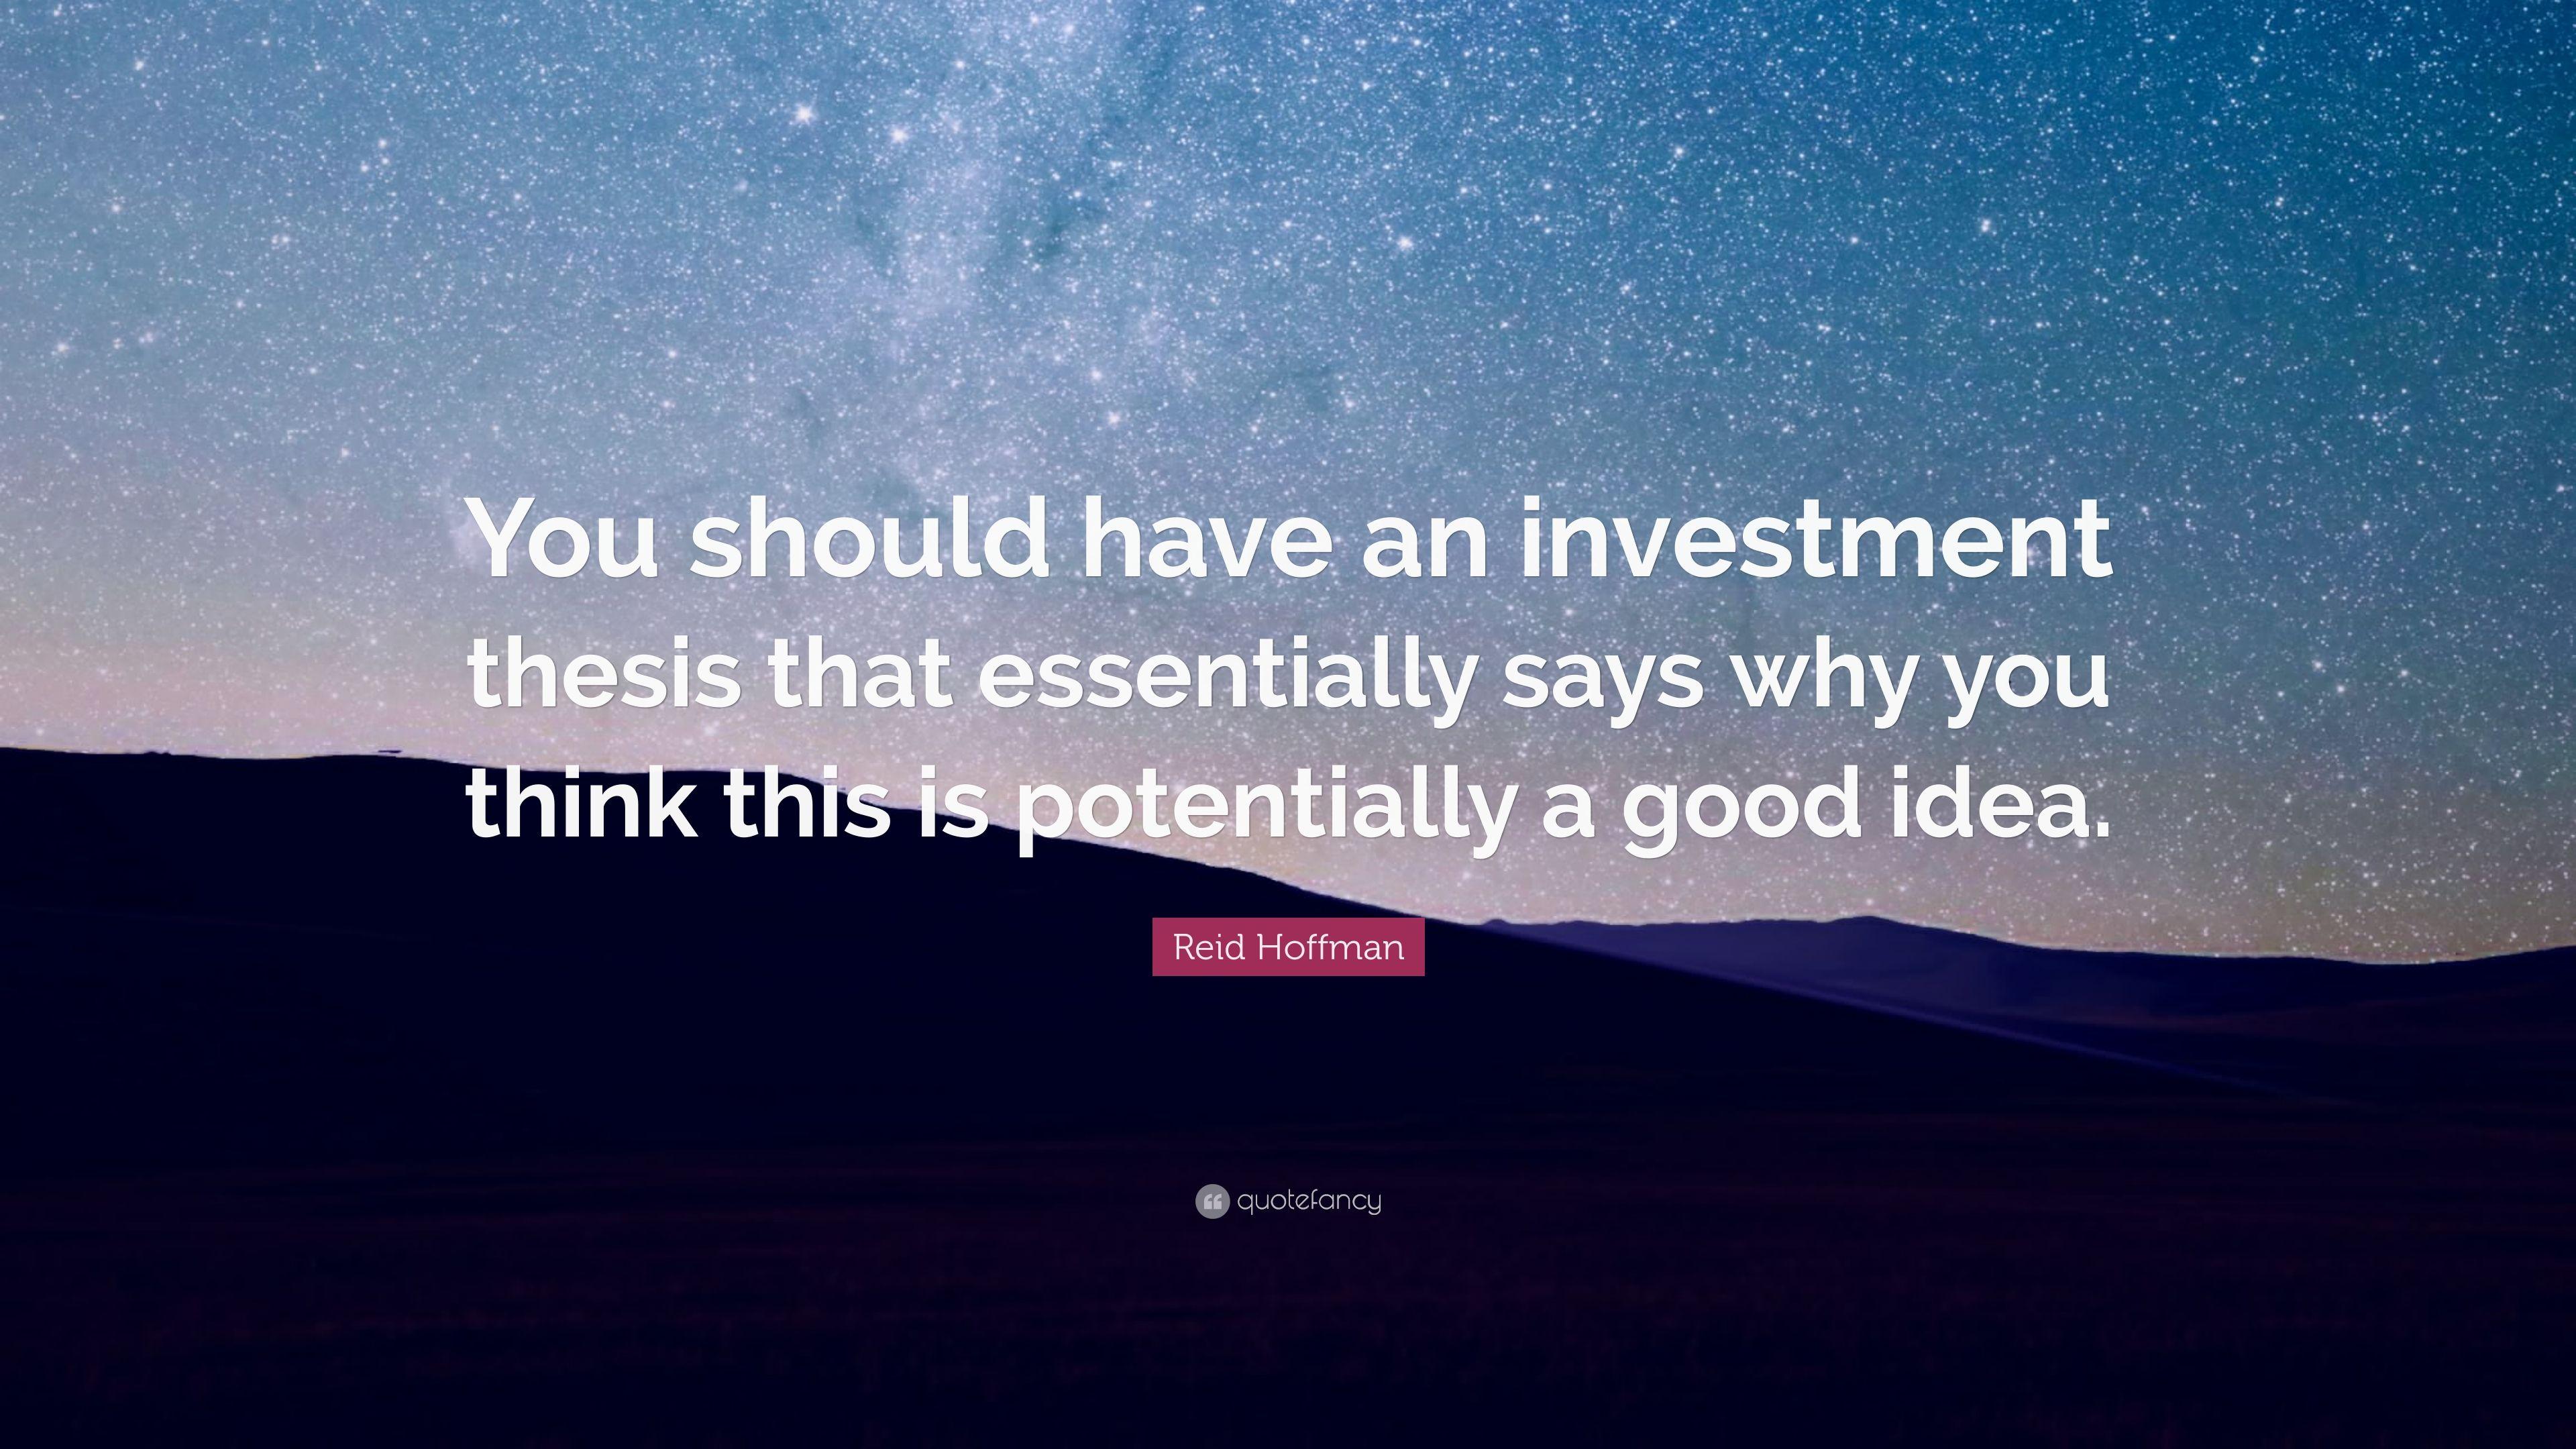 Reid Hoffman Quote: “You should have an investment thesis that